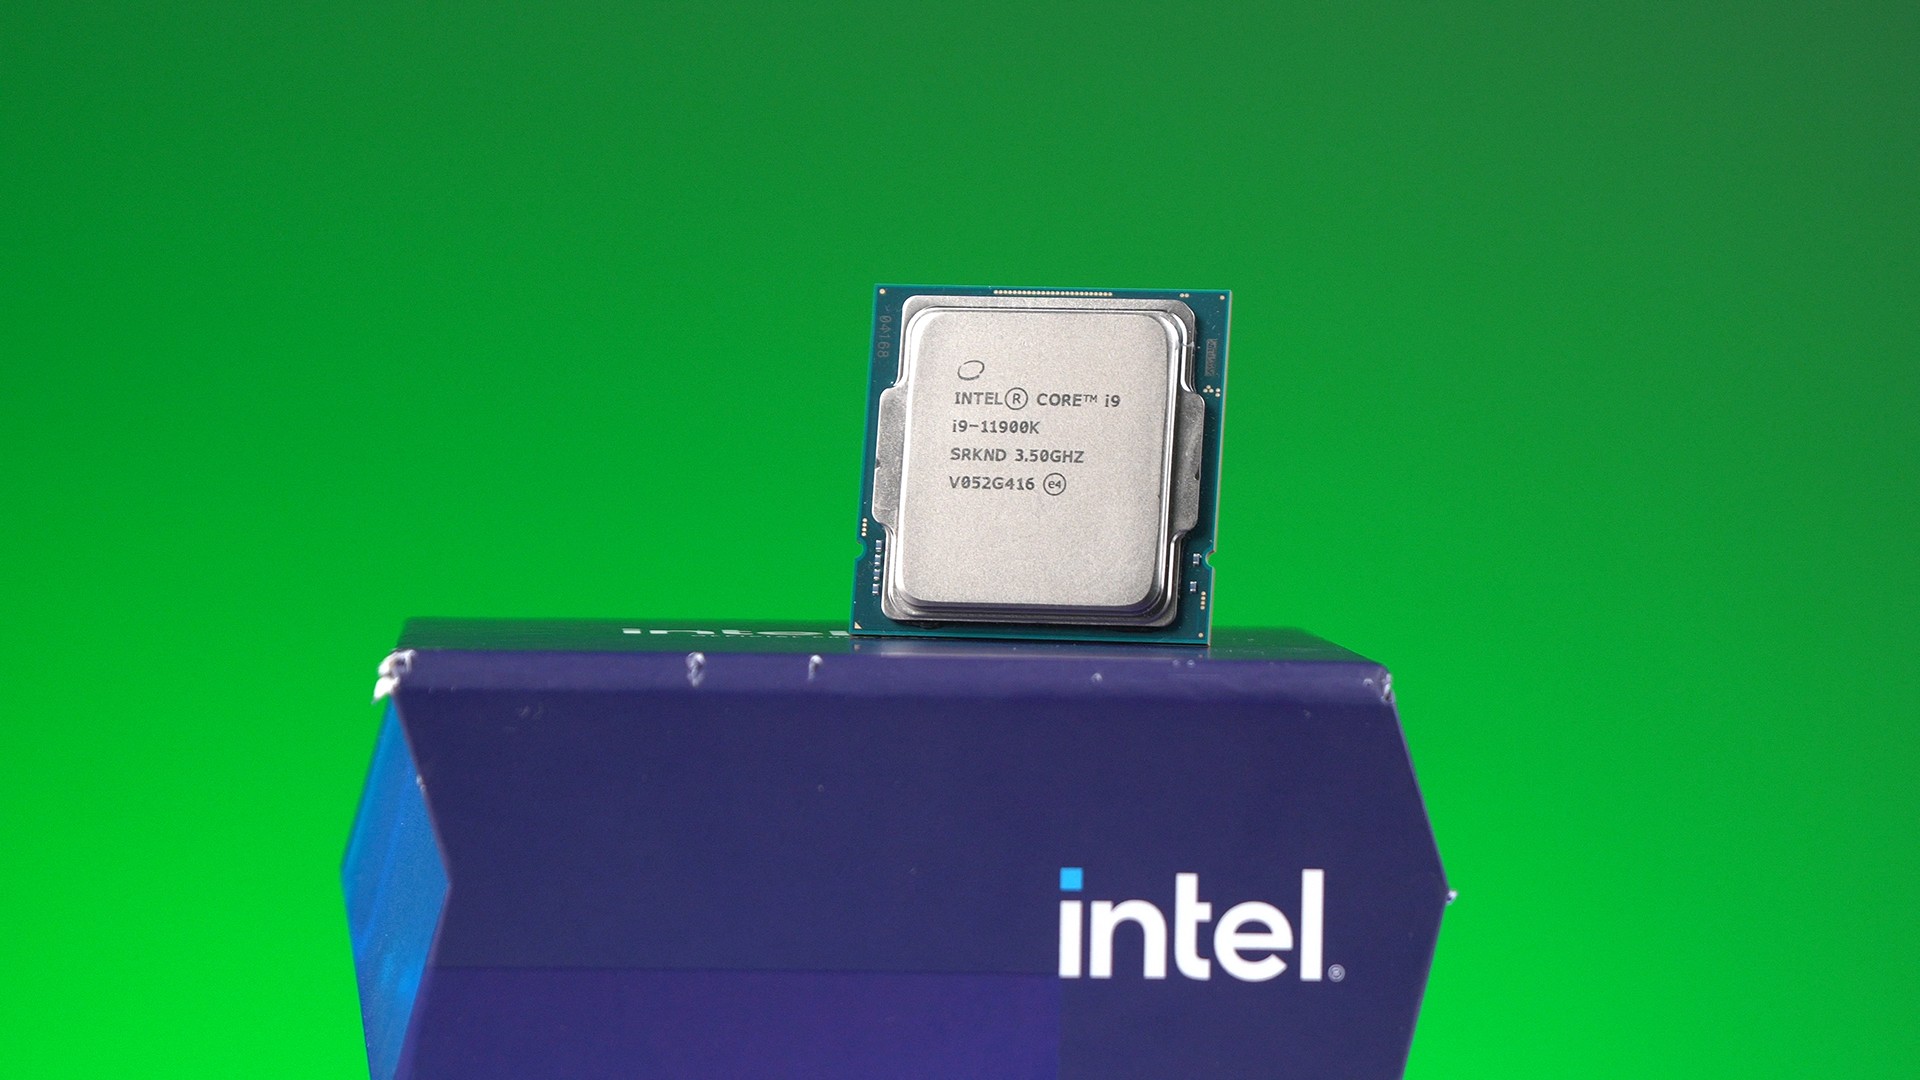 cpu-intel-core-i9-11900k-8-nhan-16-luong-350-ghz-turbo-53ghz-16m-cache-125w